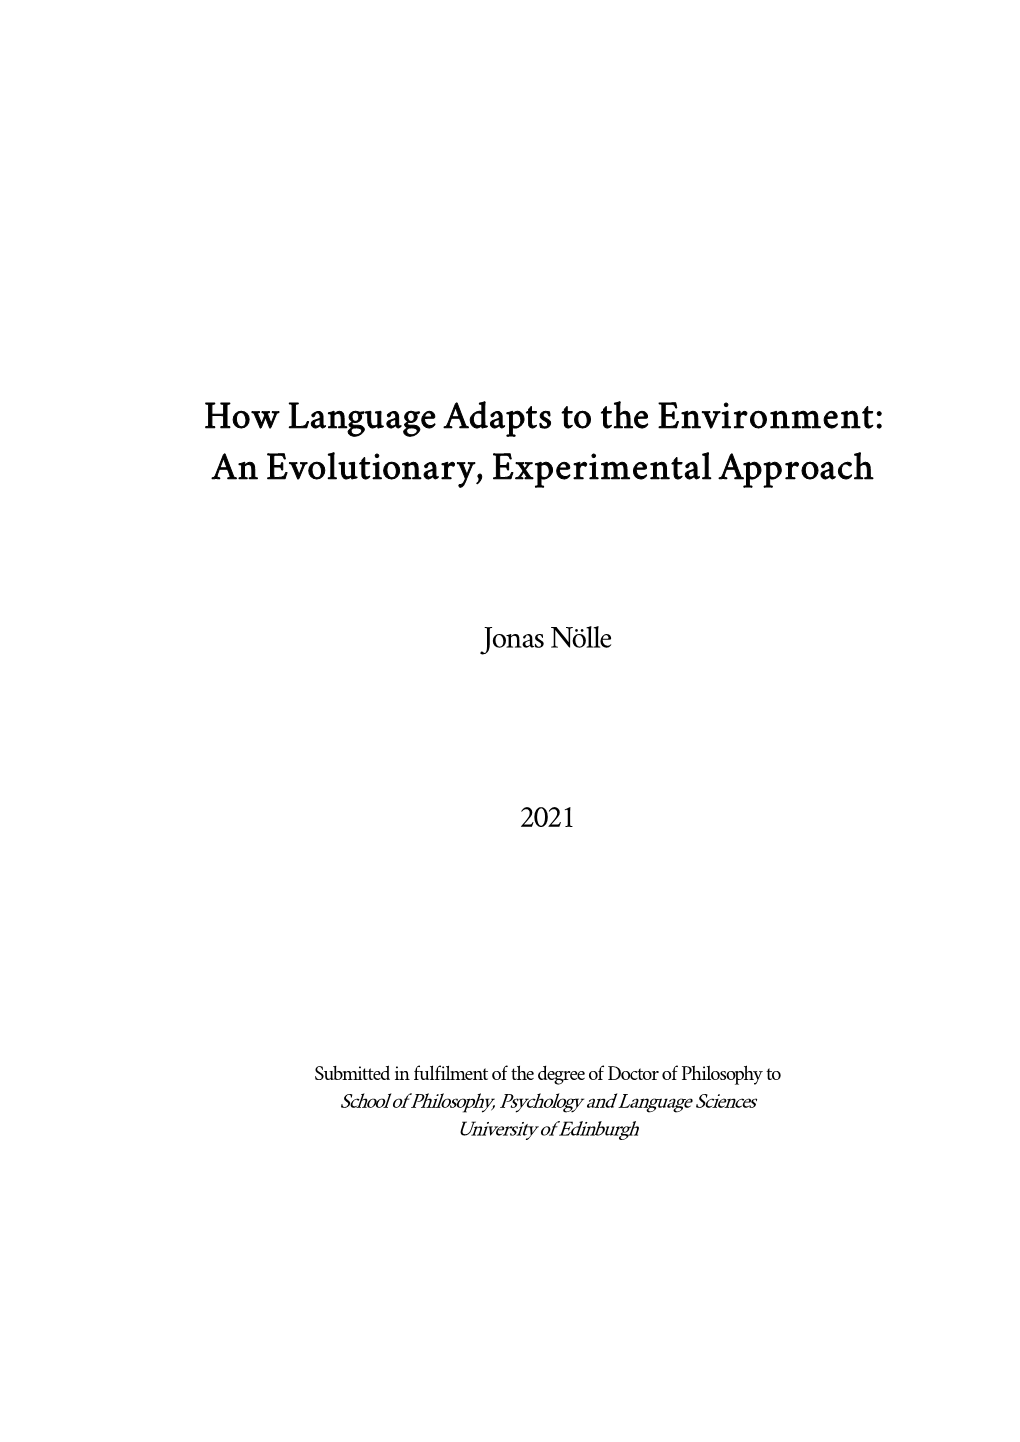 How Language Adapts to the Environment: an Evolutionary, Experimental Approach